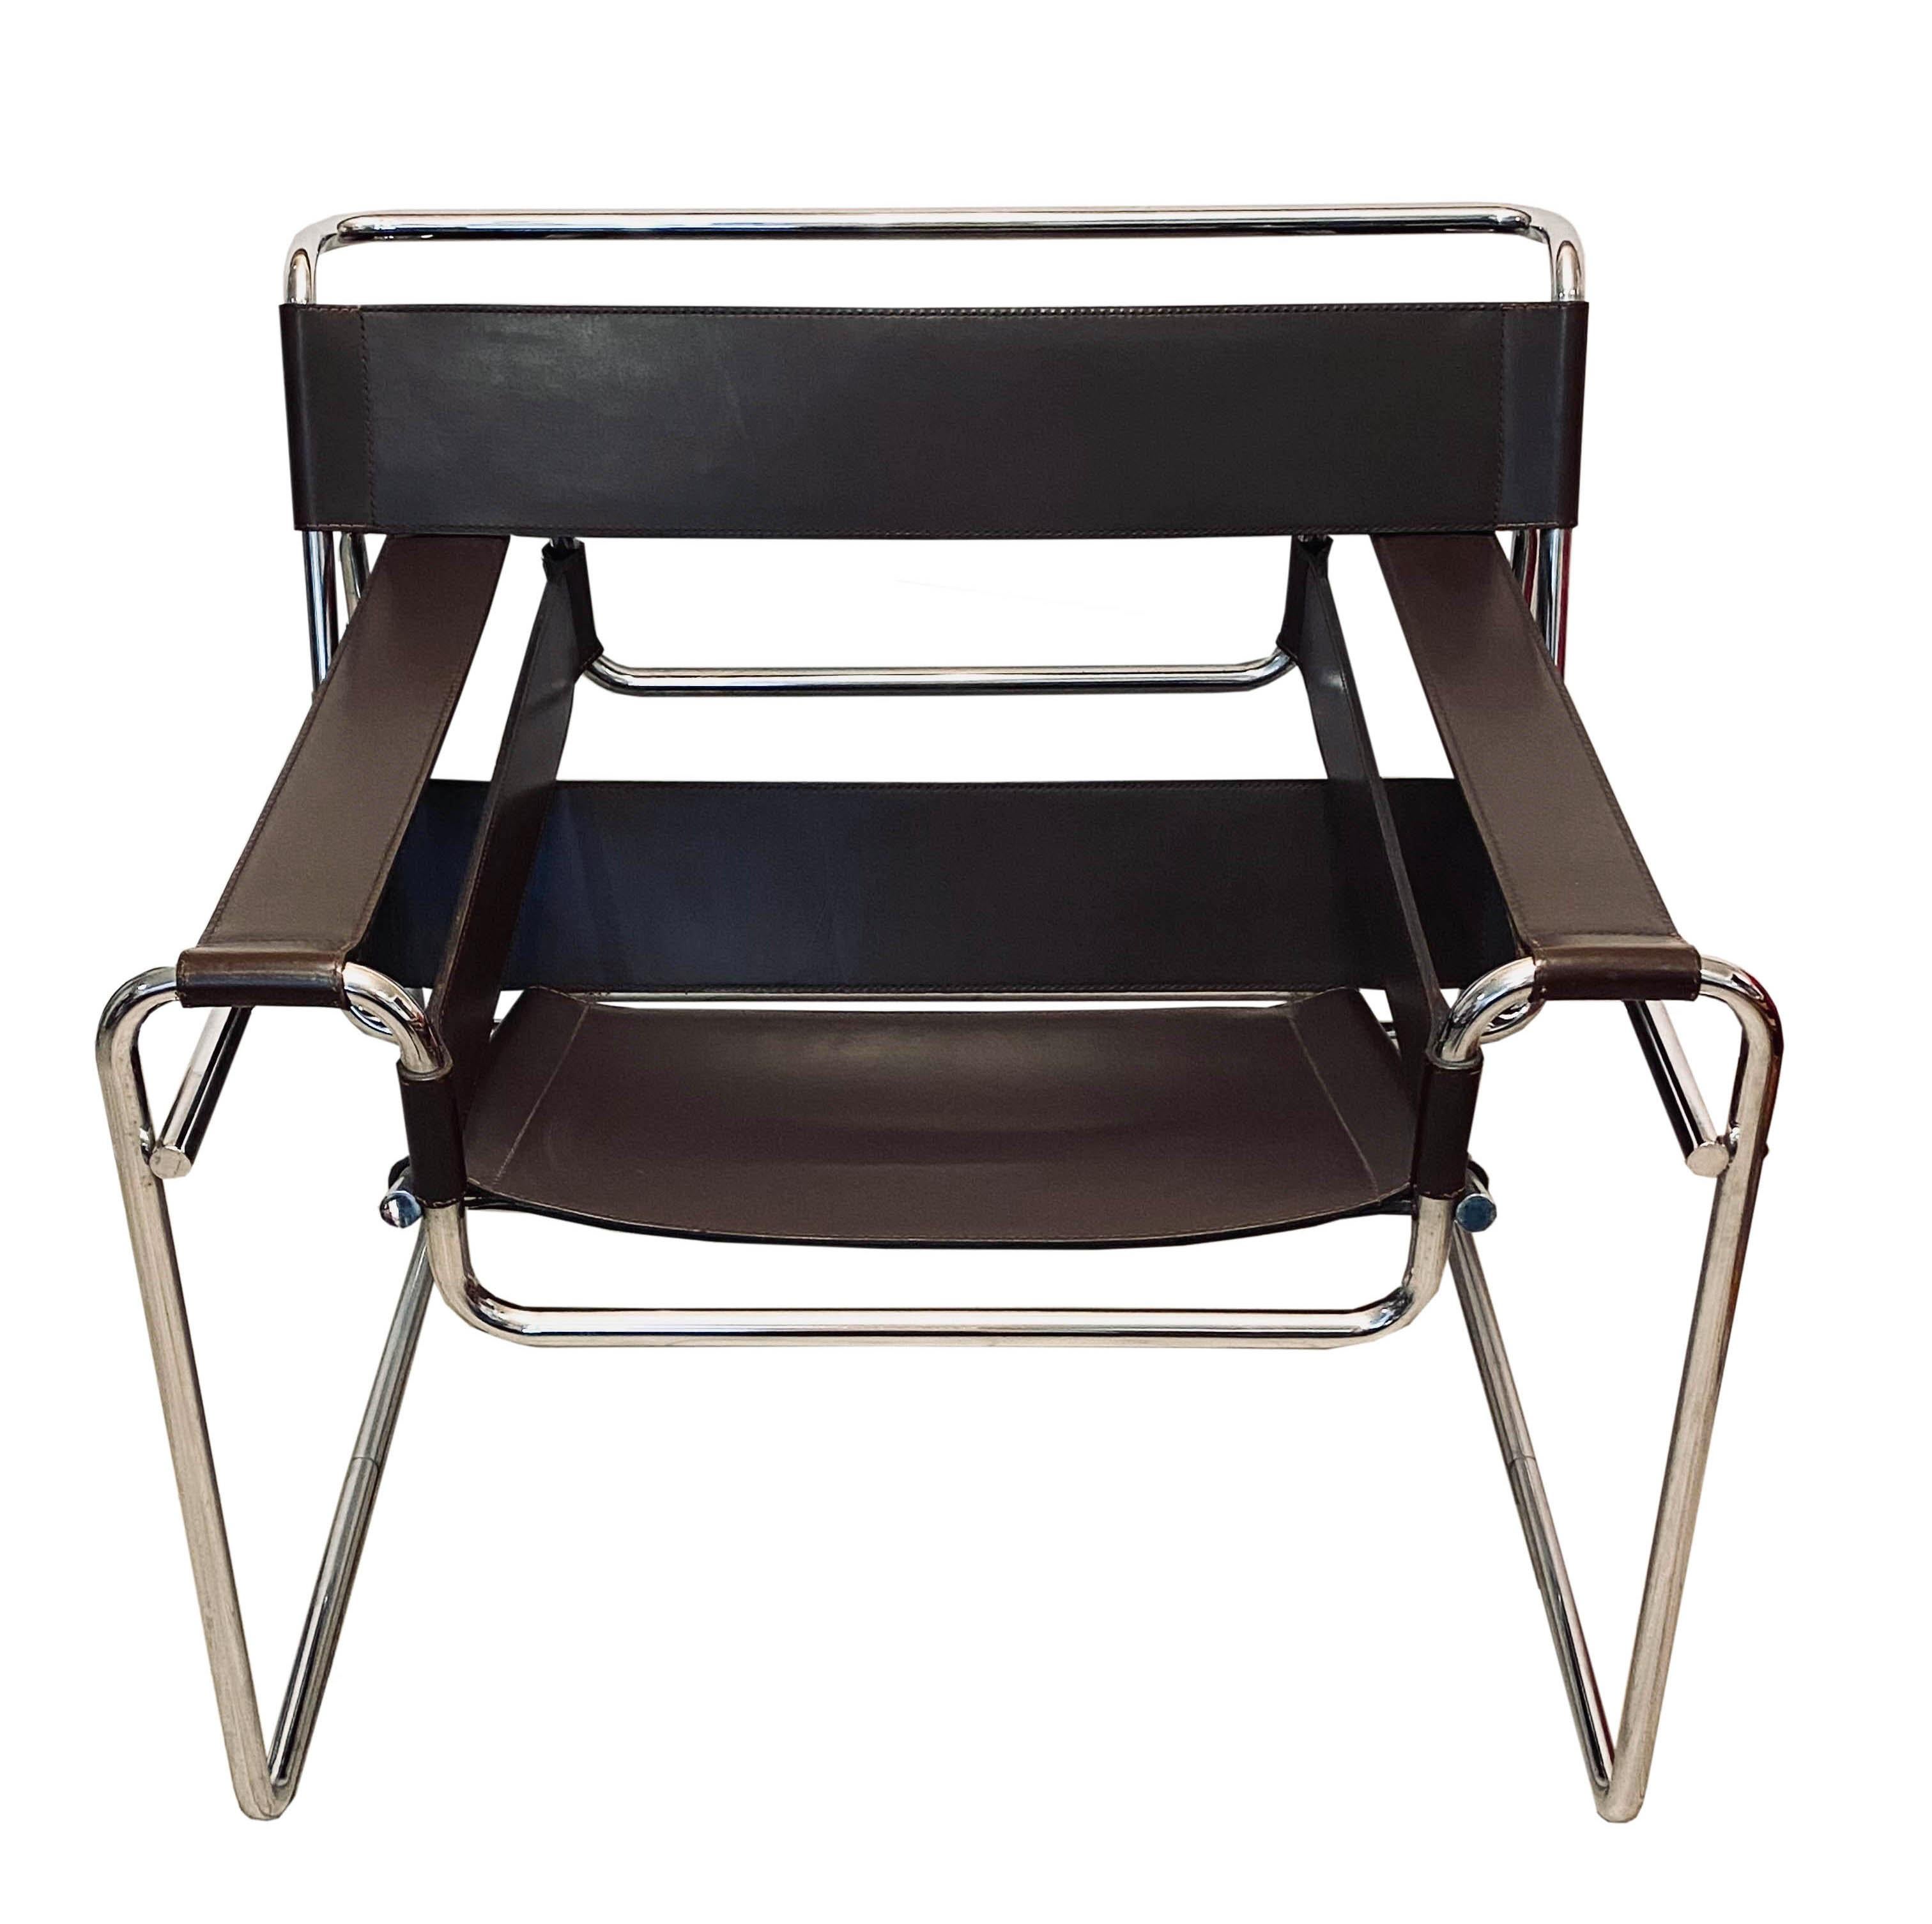 Wassily B3 mid-century Italian armchair in brown leather by Breuer for Gavina, 1960. Wassily lounge chair also known as Model B 3, with rectangular dark brown leather seat and tubular chrome-plated steel frame. Produced by Gavina in the 1960s and